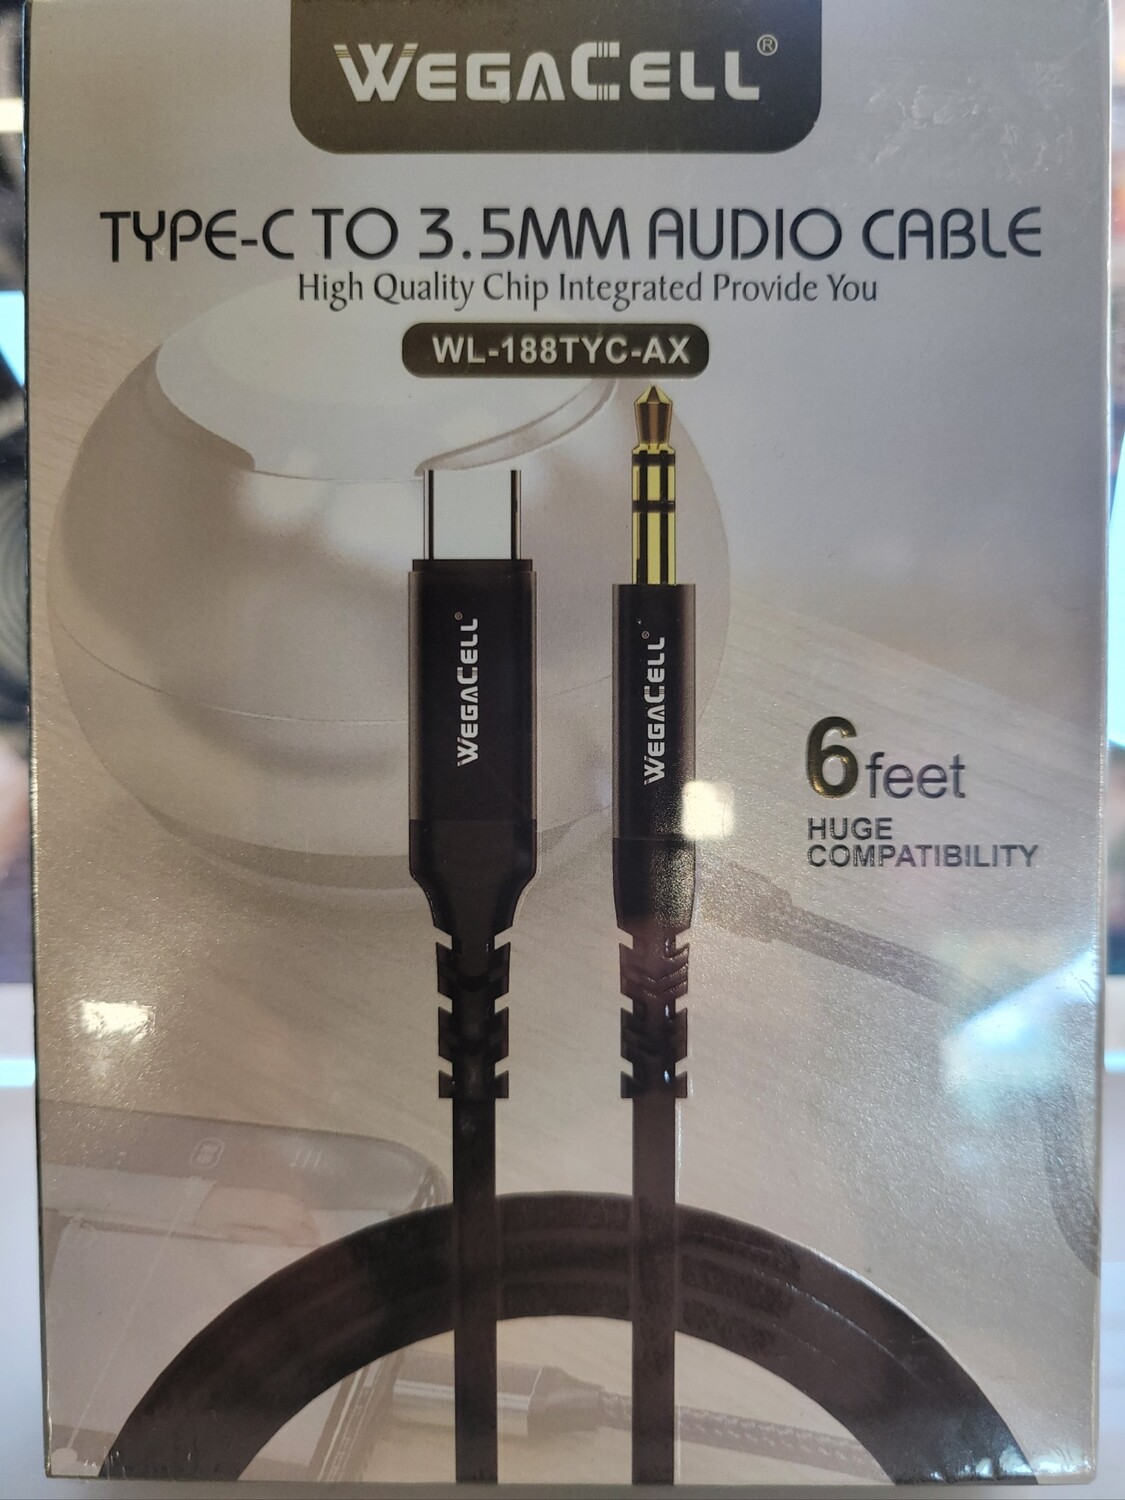 6FT TYPE-C TO 3.5MM AUDIO CABLES